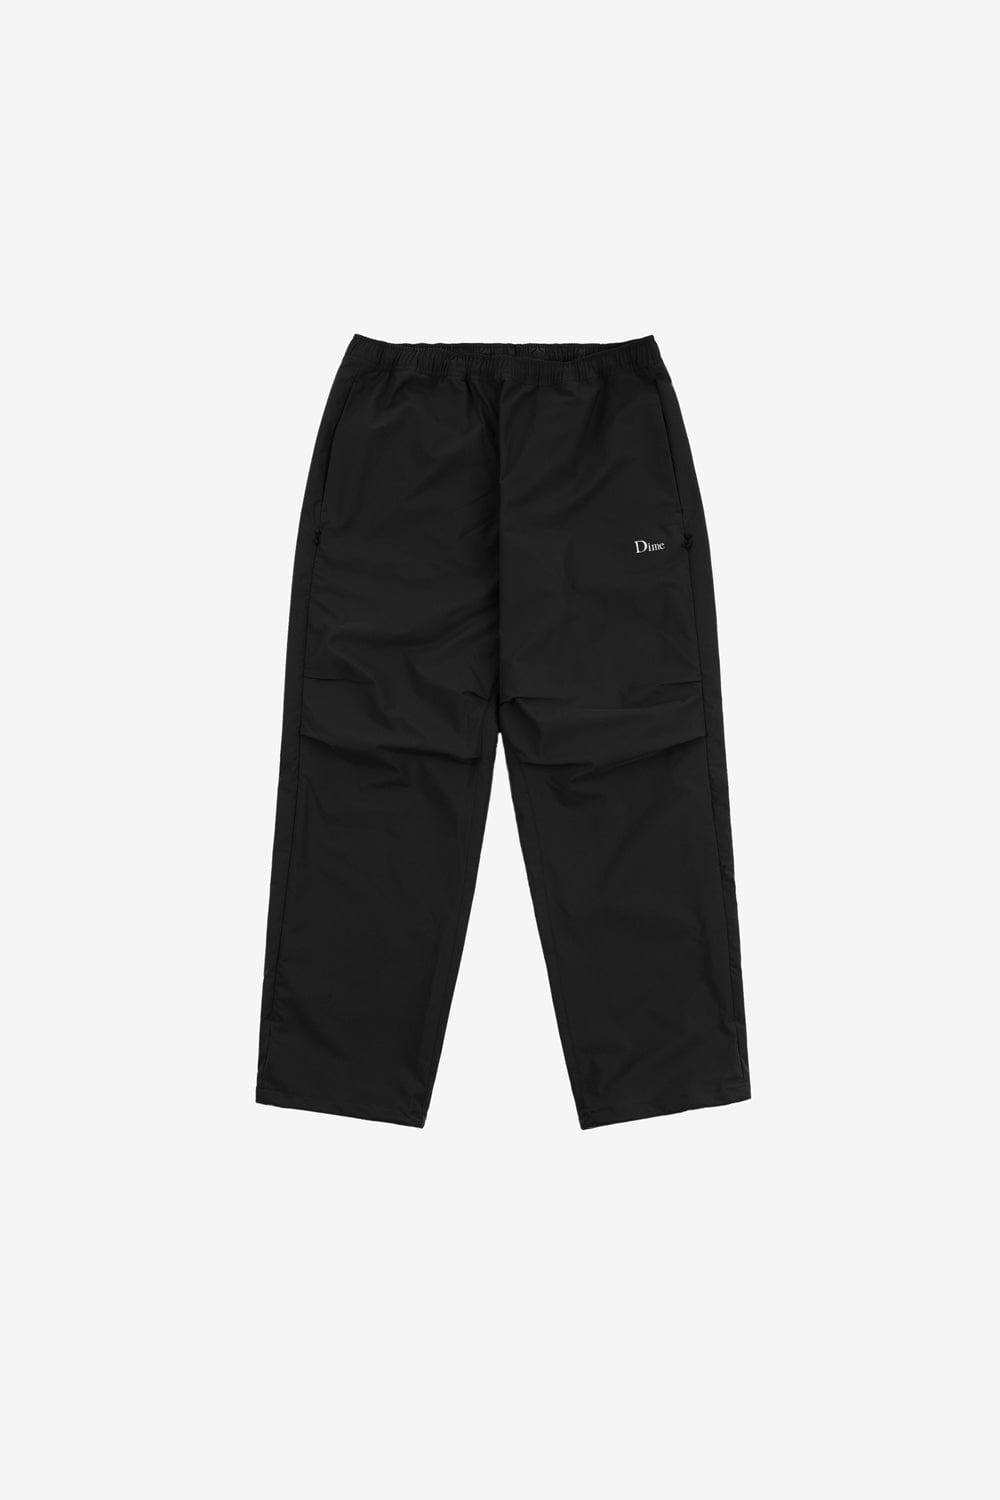 Dime Relaxed Zip Pants (Black)